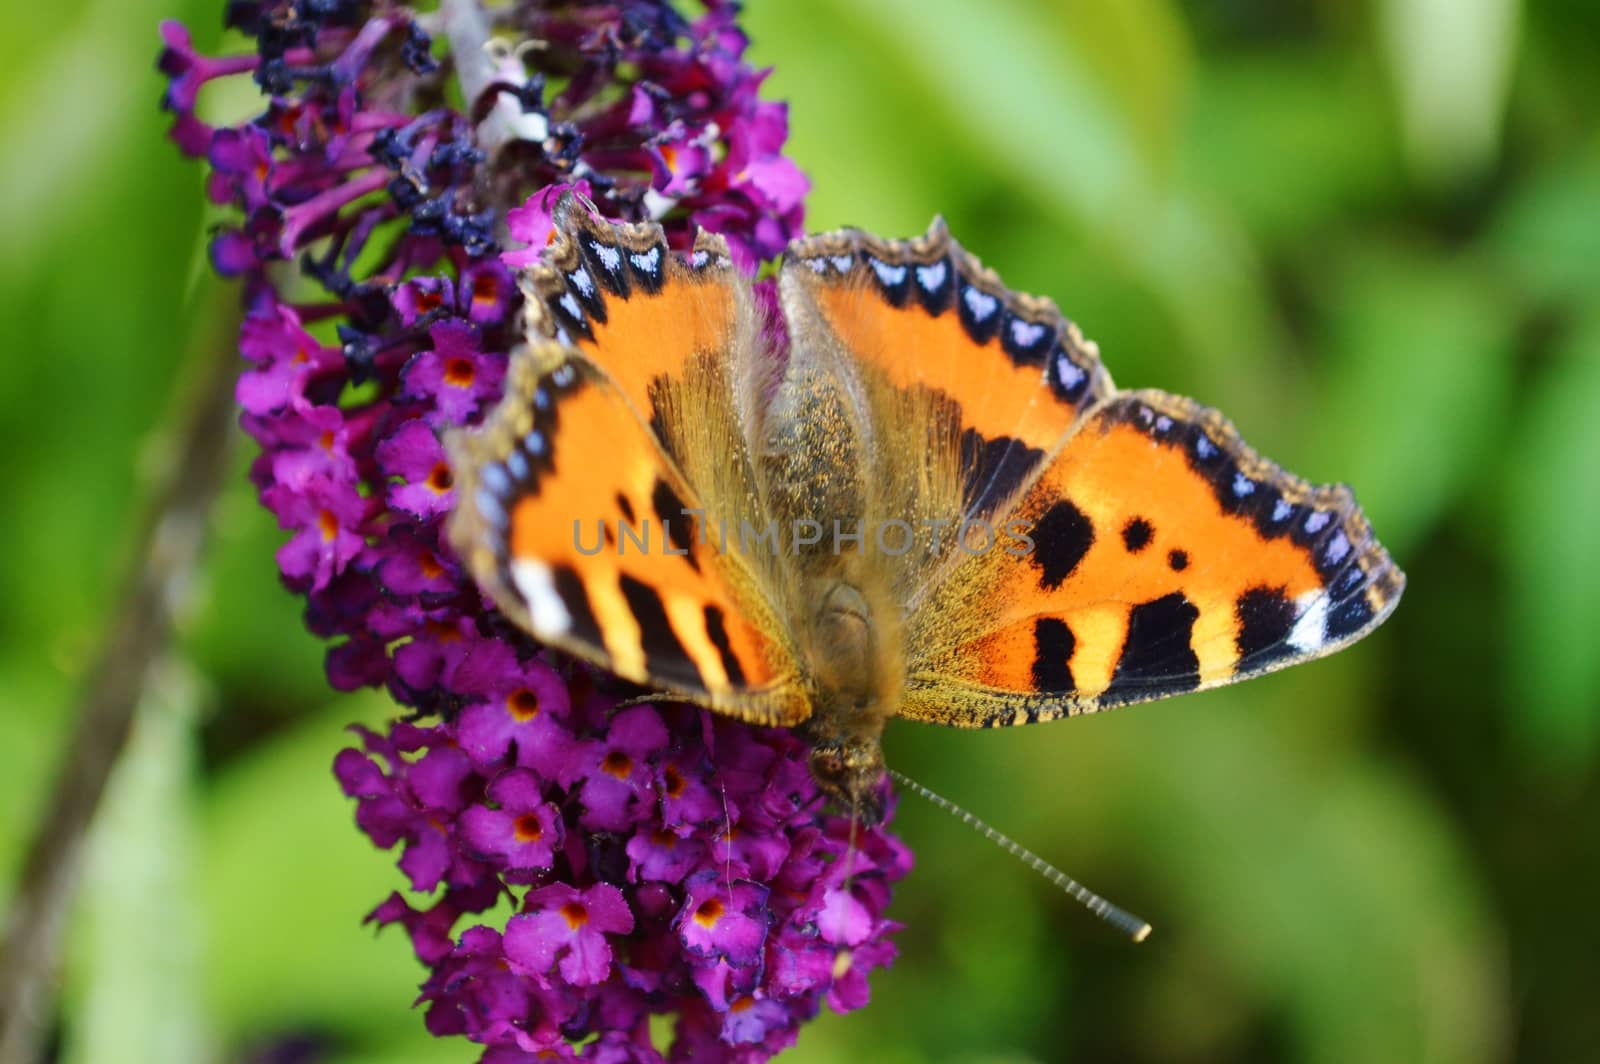 A colourful image of a Small Tortoiseshell Butterfly.